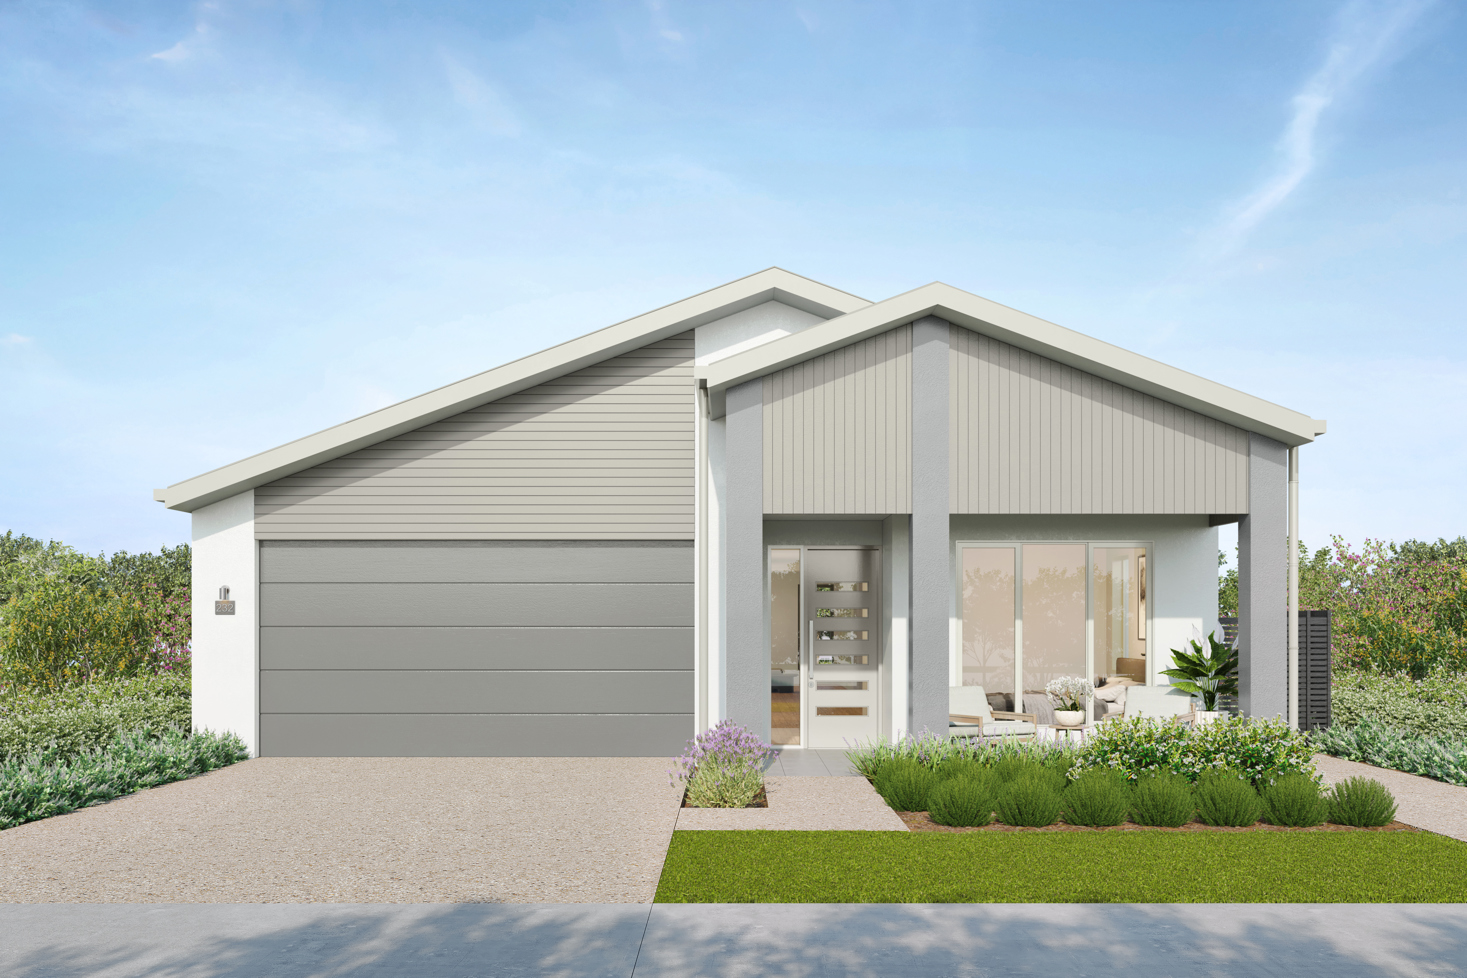 Facade render of the Springbrook G3 house design with a gable roofline in coastal colour scheme, located at Stockland Halcyon Gables in The Hills district.